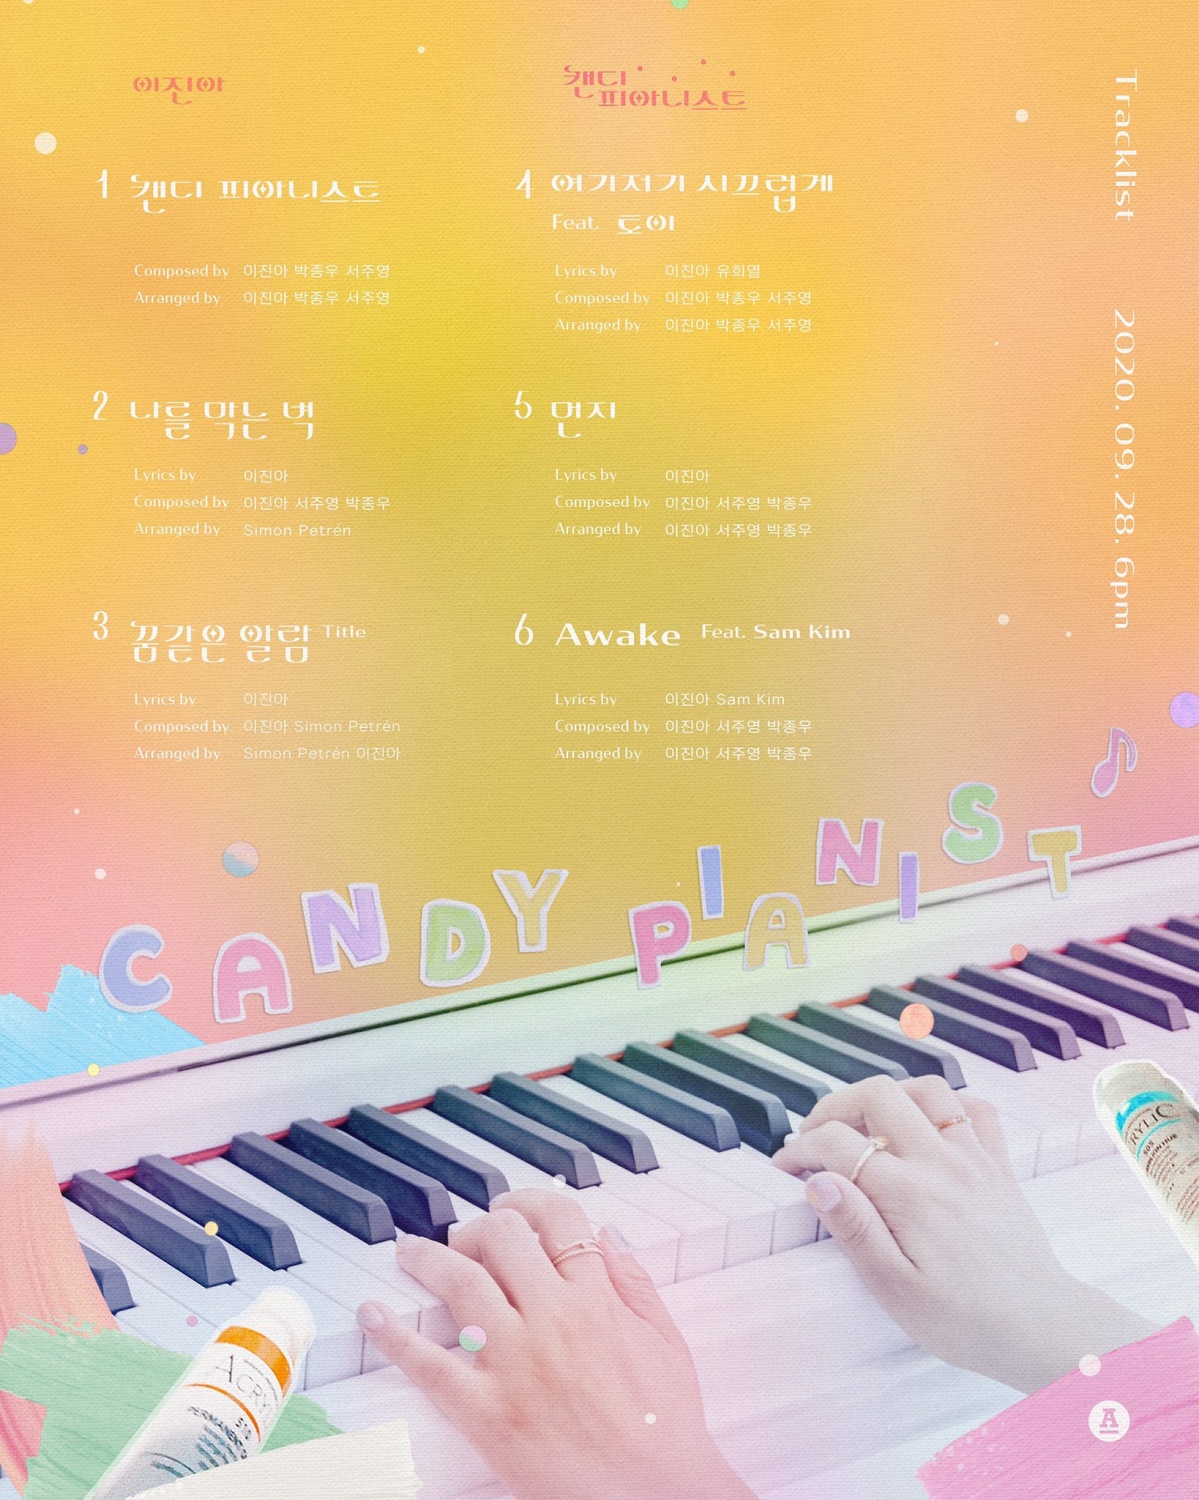 Lee Jin-ah writes and composes all songs, Toy and SAM KIM featuring